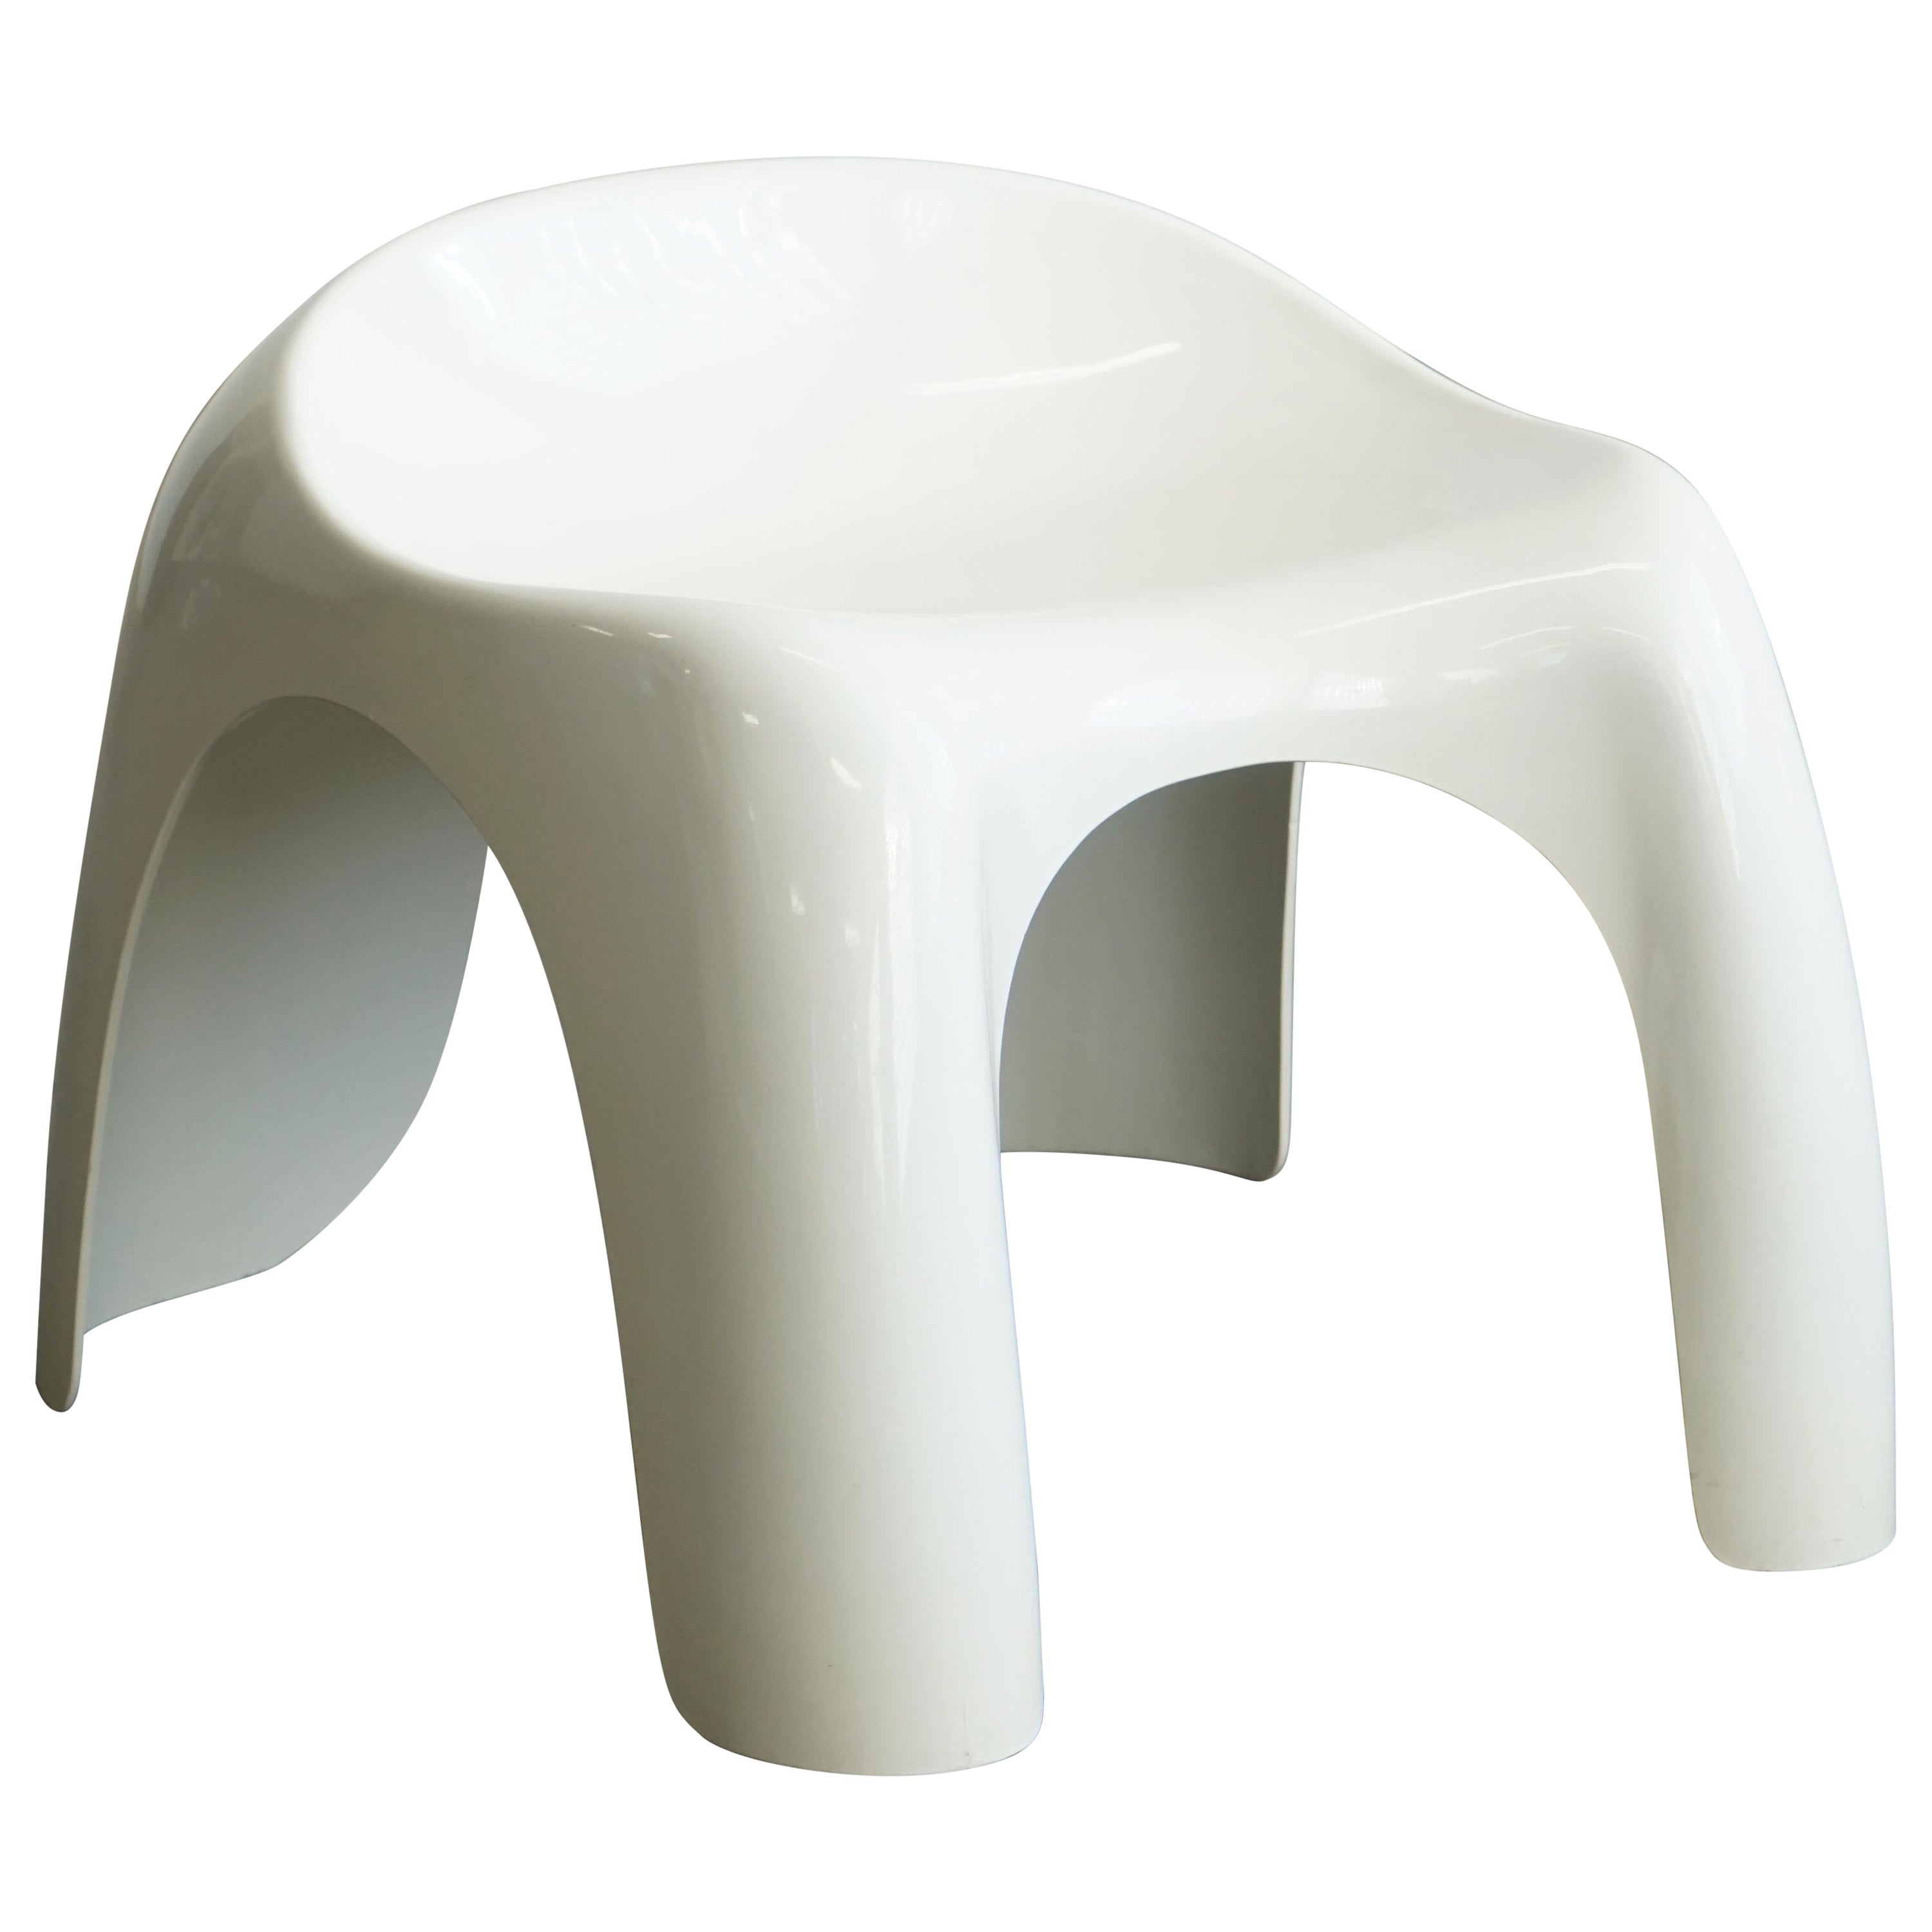 Efebo Stacking Stool by Stacy Dukes for Artemide, Italy post modern, 4 avail For Sale